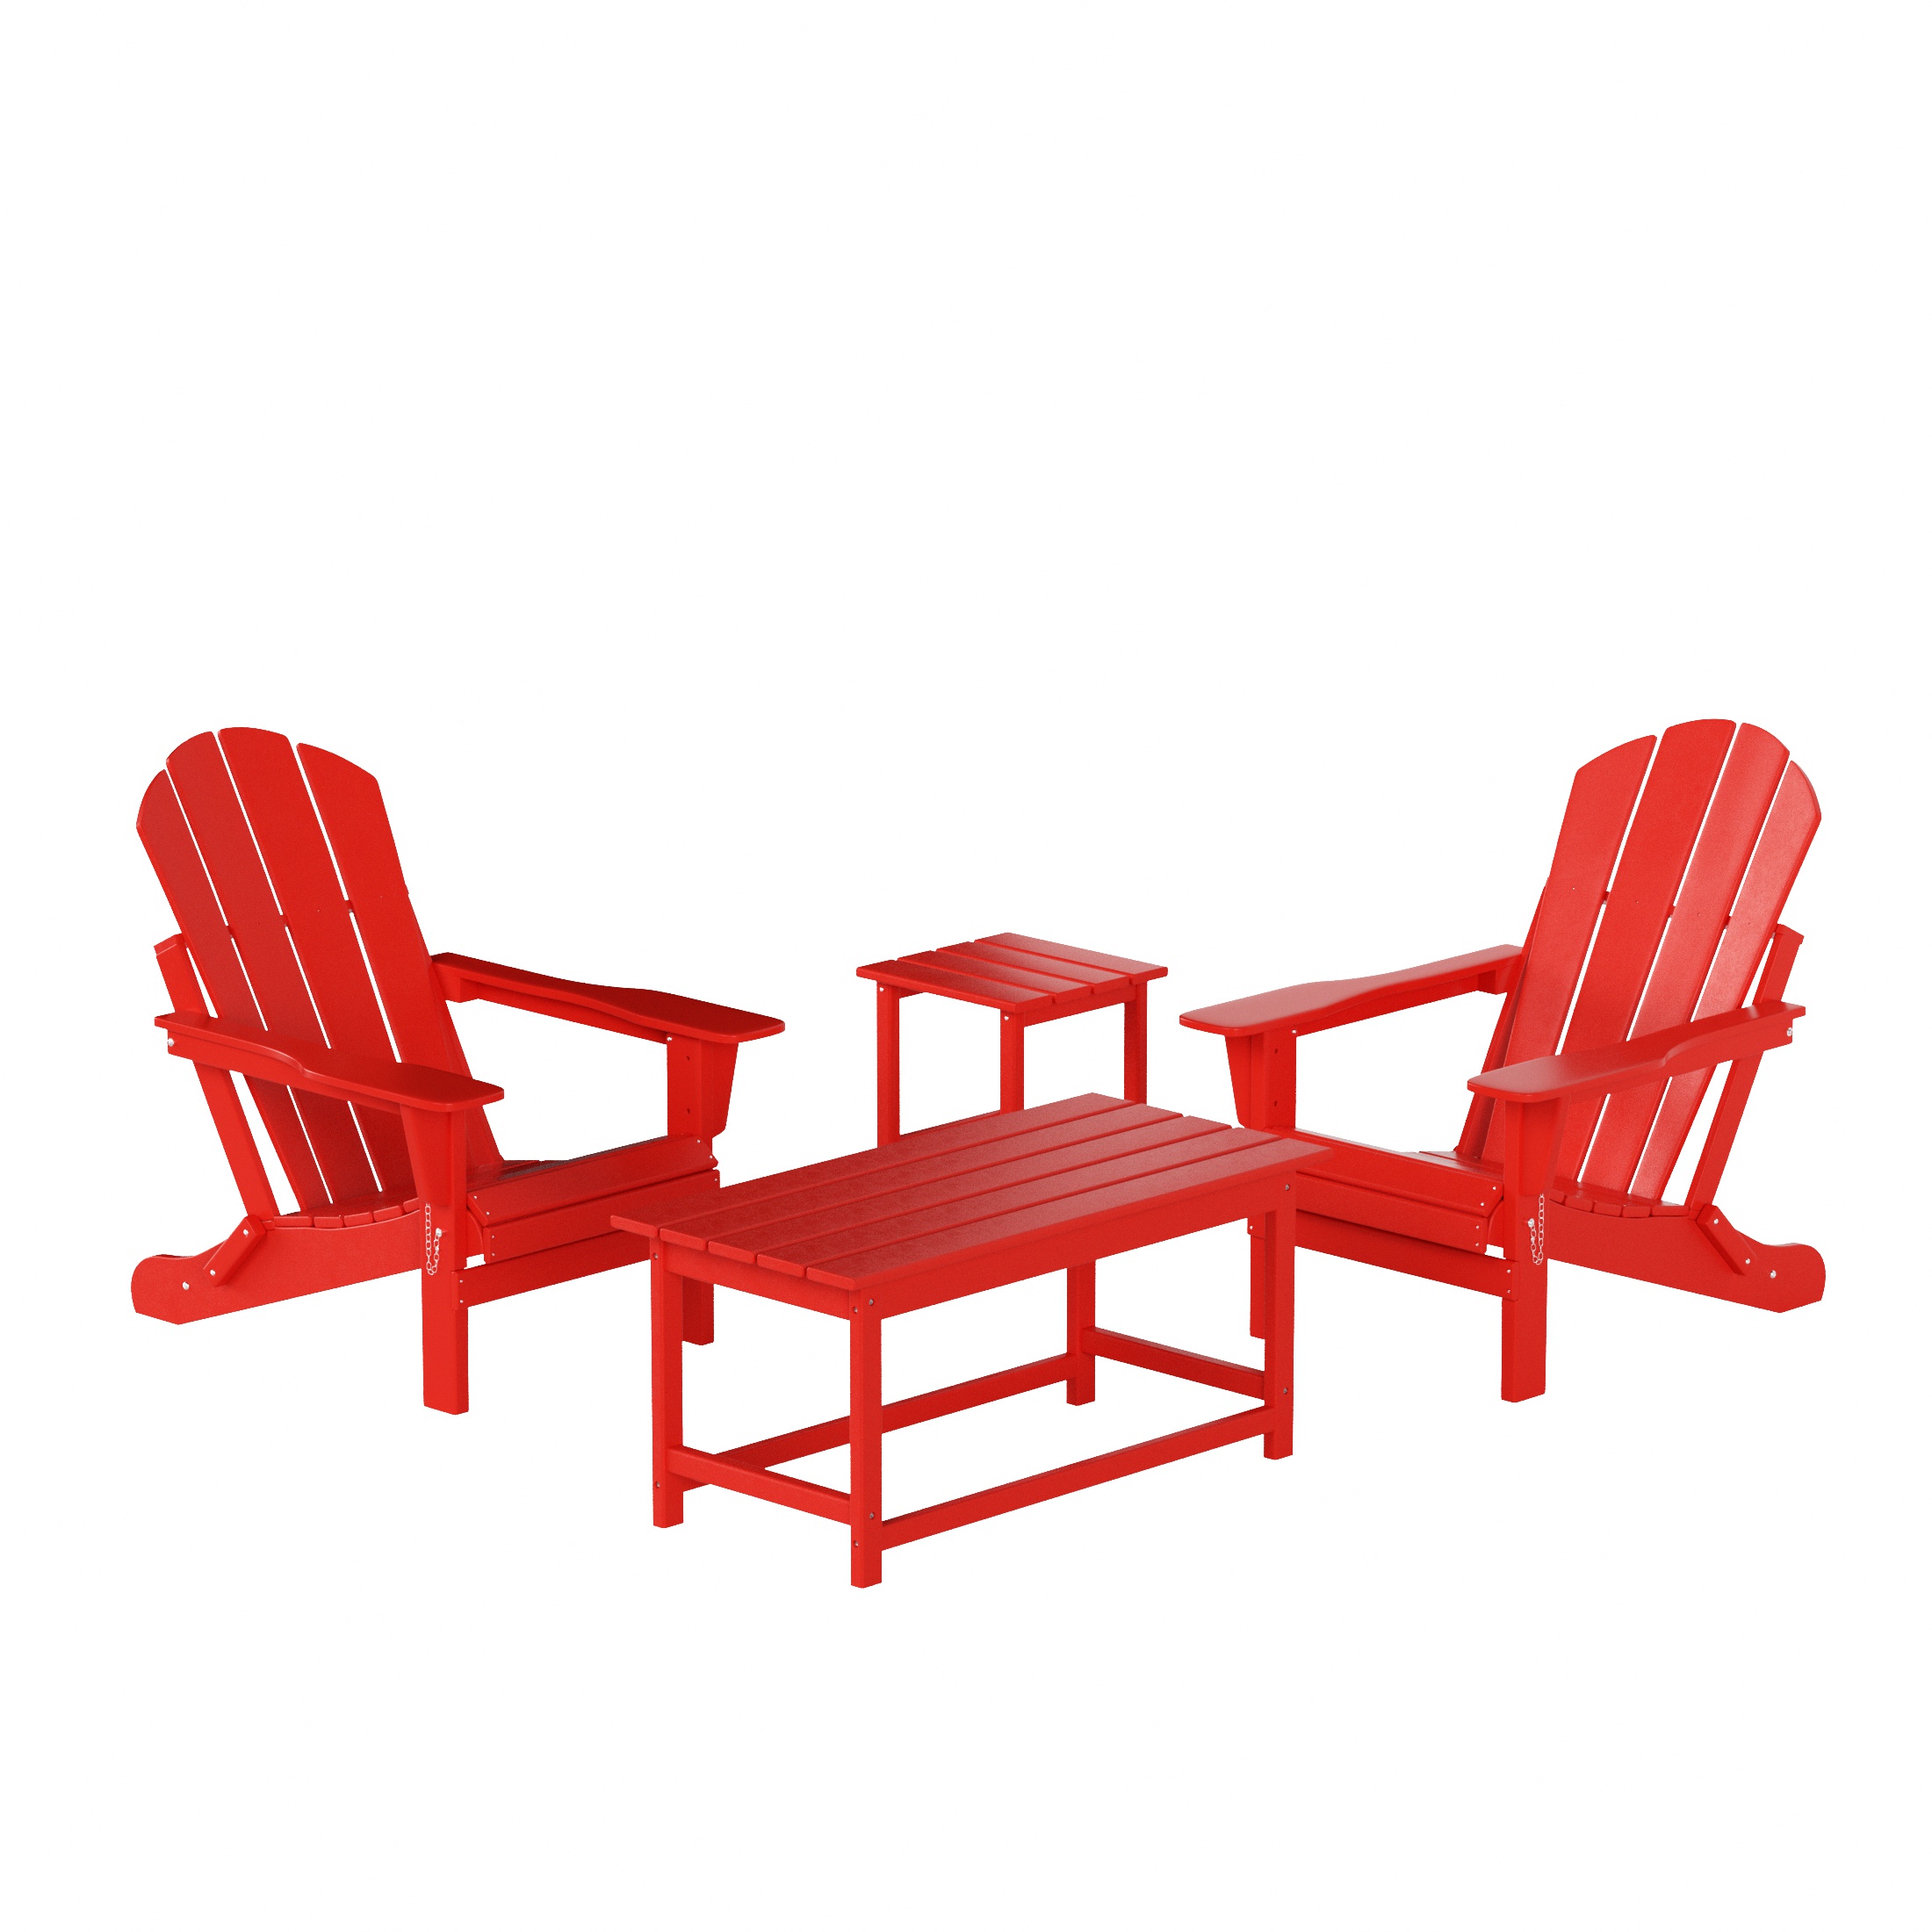 WestinTrends Malibu 4-Pieces Outdoor Patio Furniture Set, All Weather Outdoor Seating Plastic Adirondack Chair Set of 2 with Coffee Table and Side Table, Red - image 1 of 7